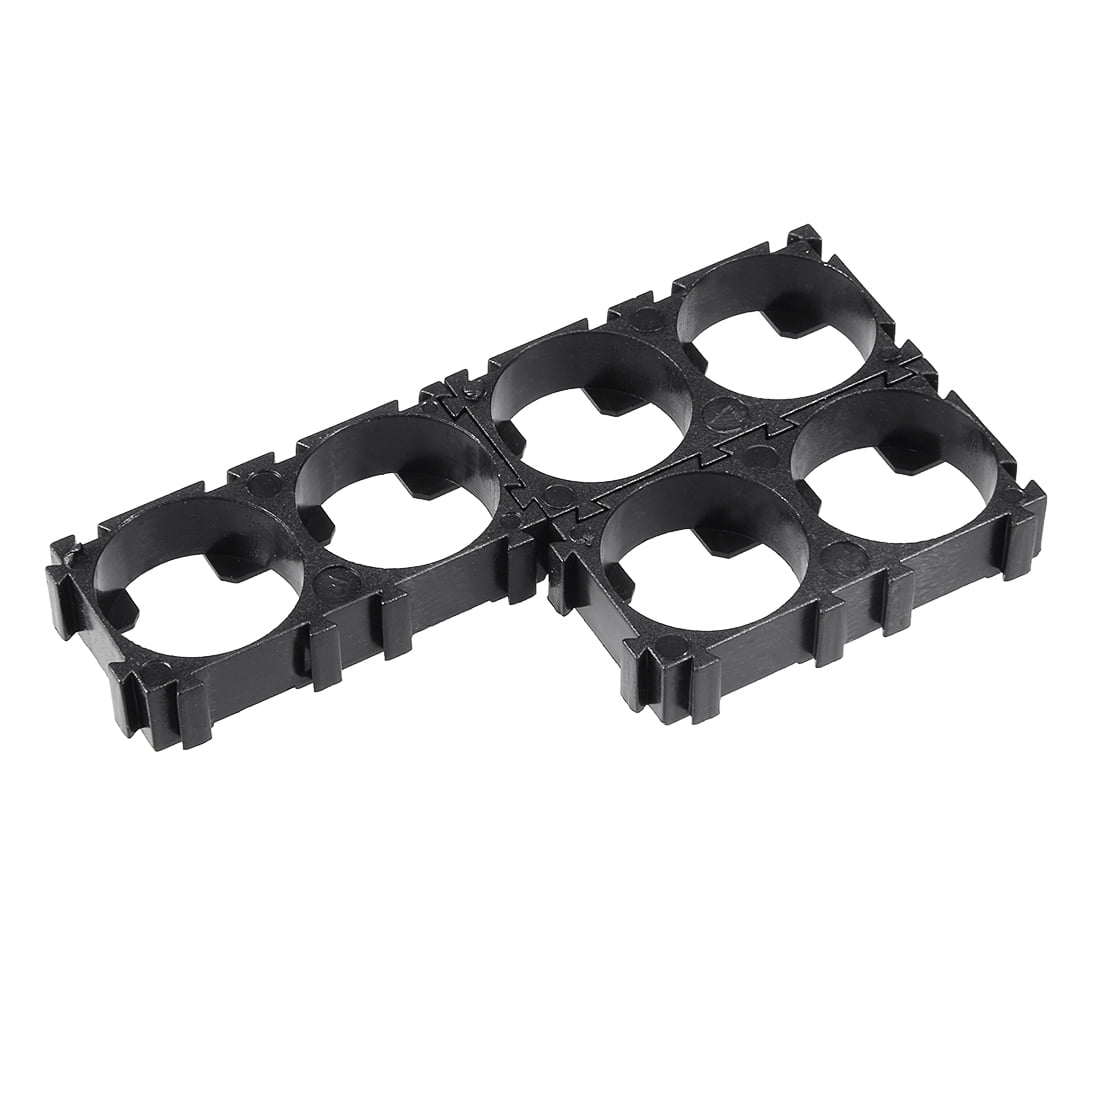 Basage 20x 18650 Lithium Battery Double Holder Bracket for DIY Cell Pack Black